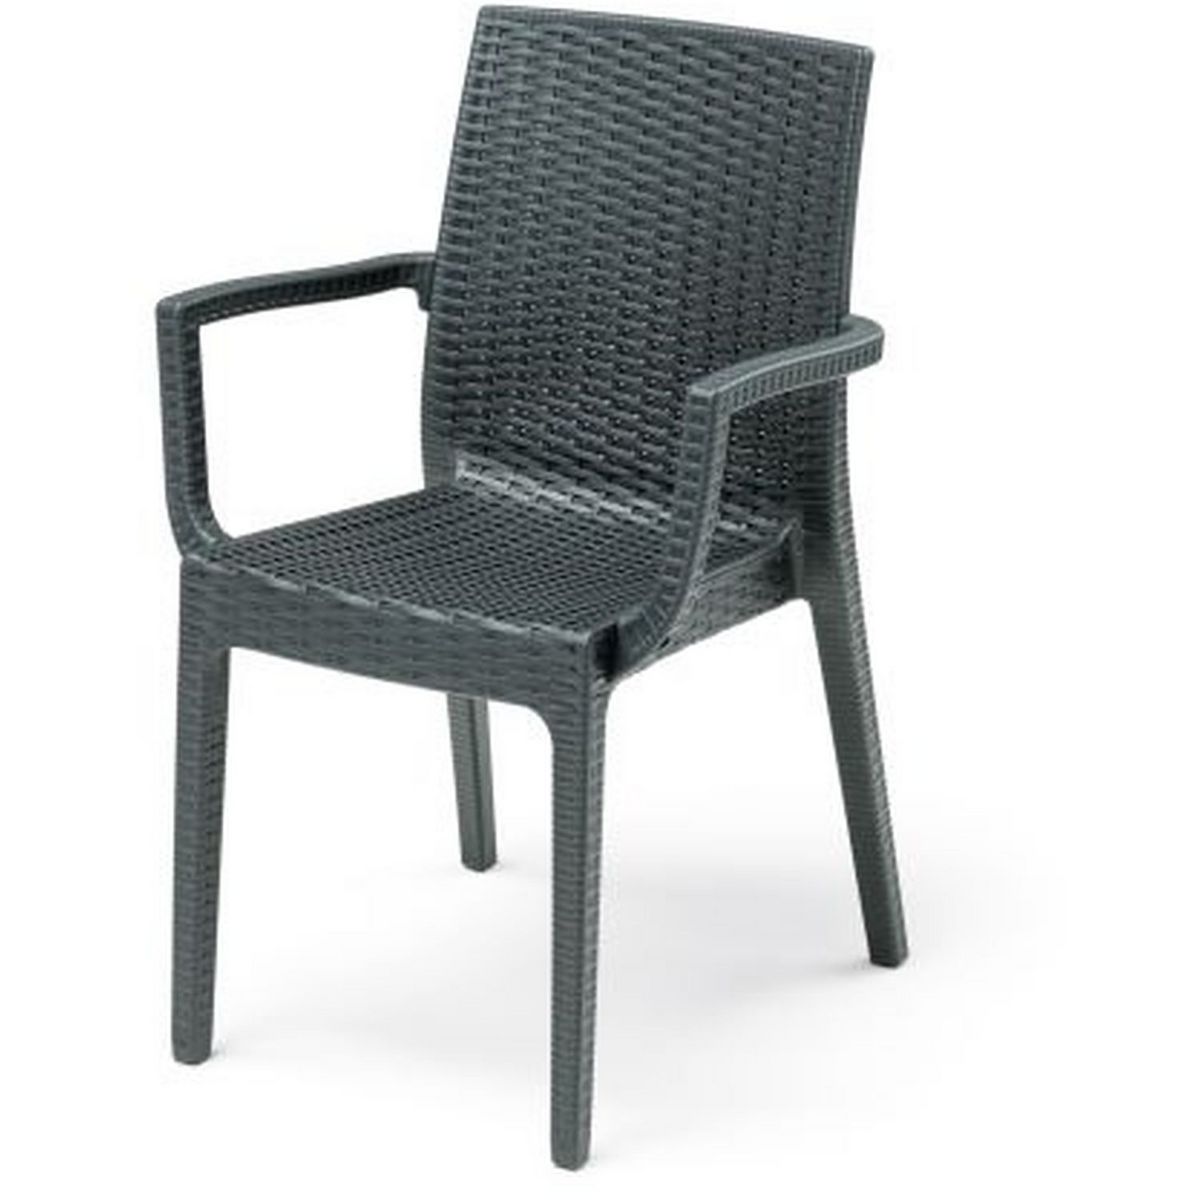 Fauteuil empilable DAFNE gris anthracite